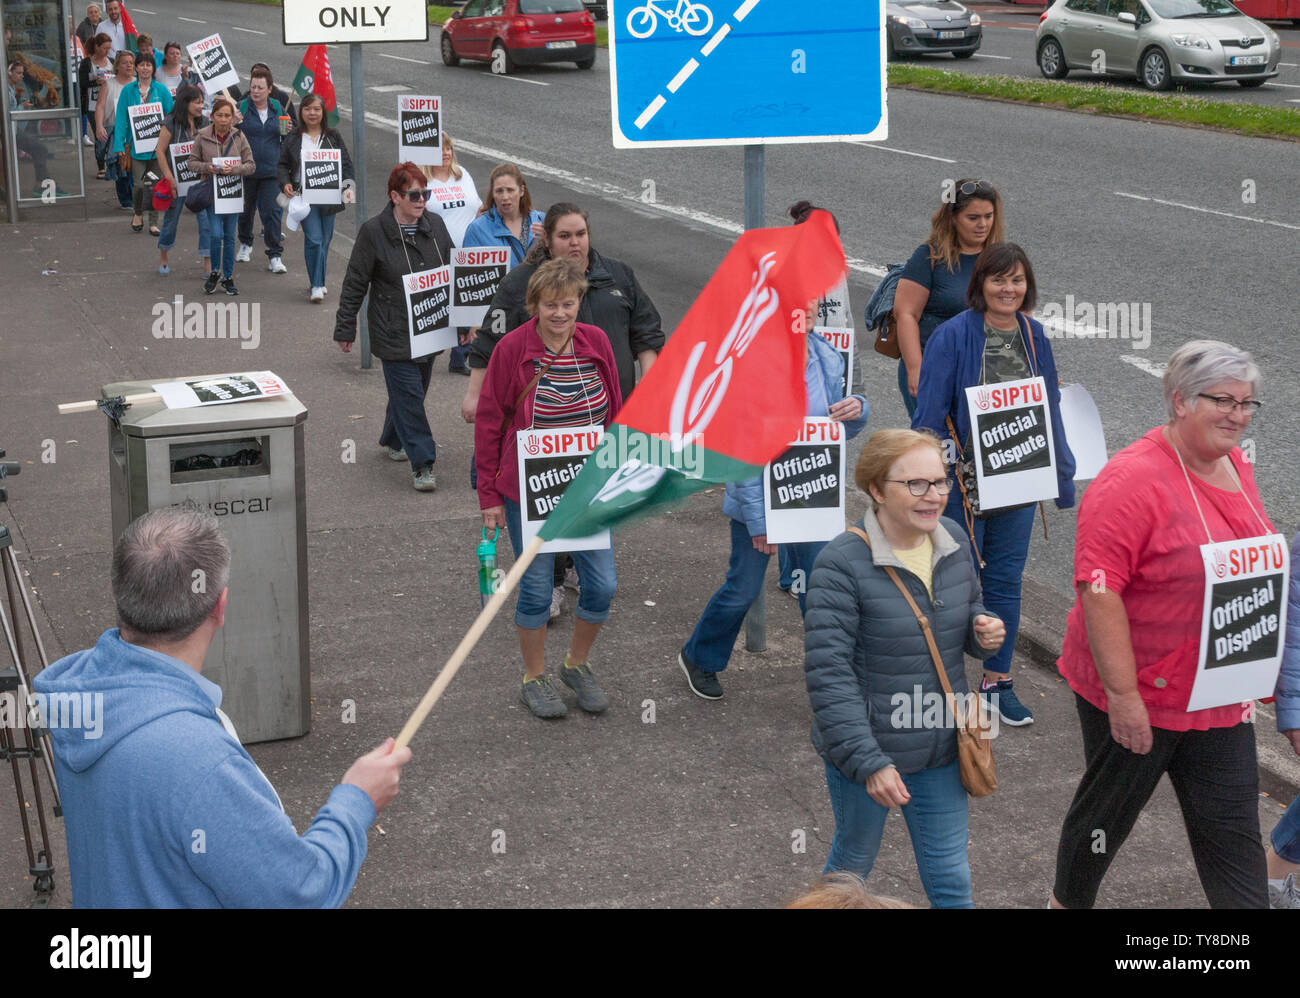 Cork City, Cork, Ireland. 26th June, 2019.  Strikers 5picketing outside Cork University Hospital in Cork City as part of their third 24-hour work stoppage by members of the Services, Industrial, Professional and Technical Union (SIPTU) in support of pay and staffing claim.  SIPTU are demanding pay rises for members worth over €19m that it says are due under a job evaluation scheme. The union says the increases are worth €1,500 to €3,000 for each member. Credit: David Creedon/Alamy Live News Stock Photo